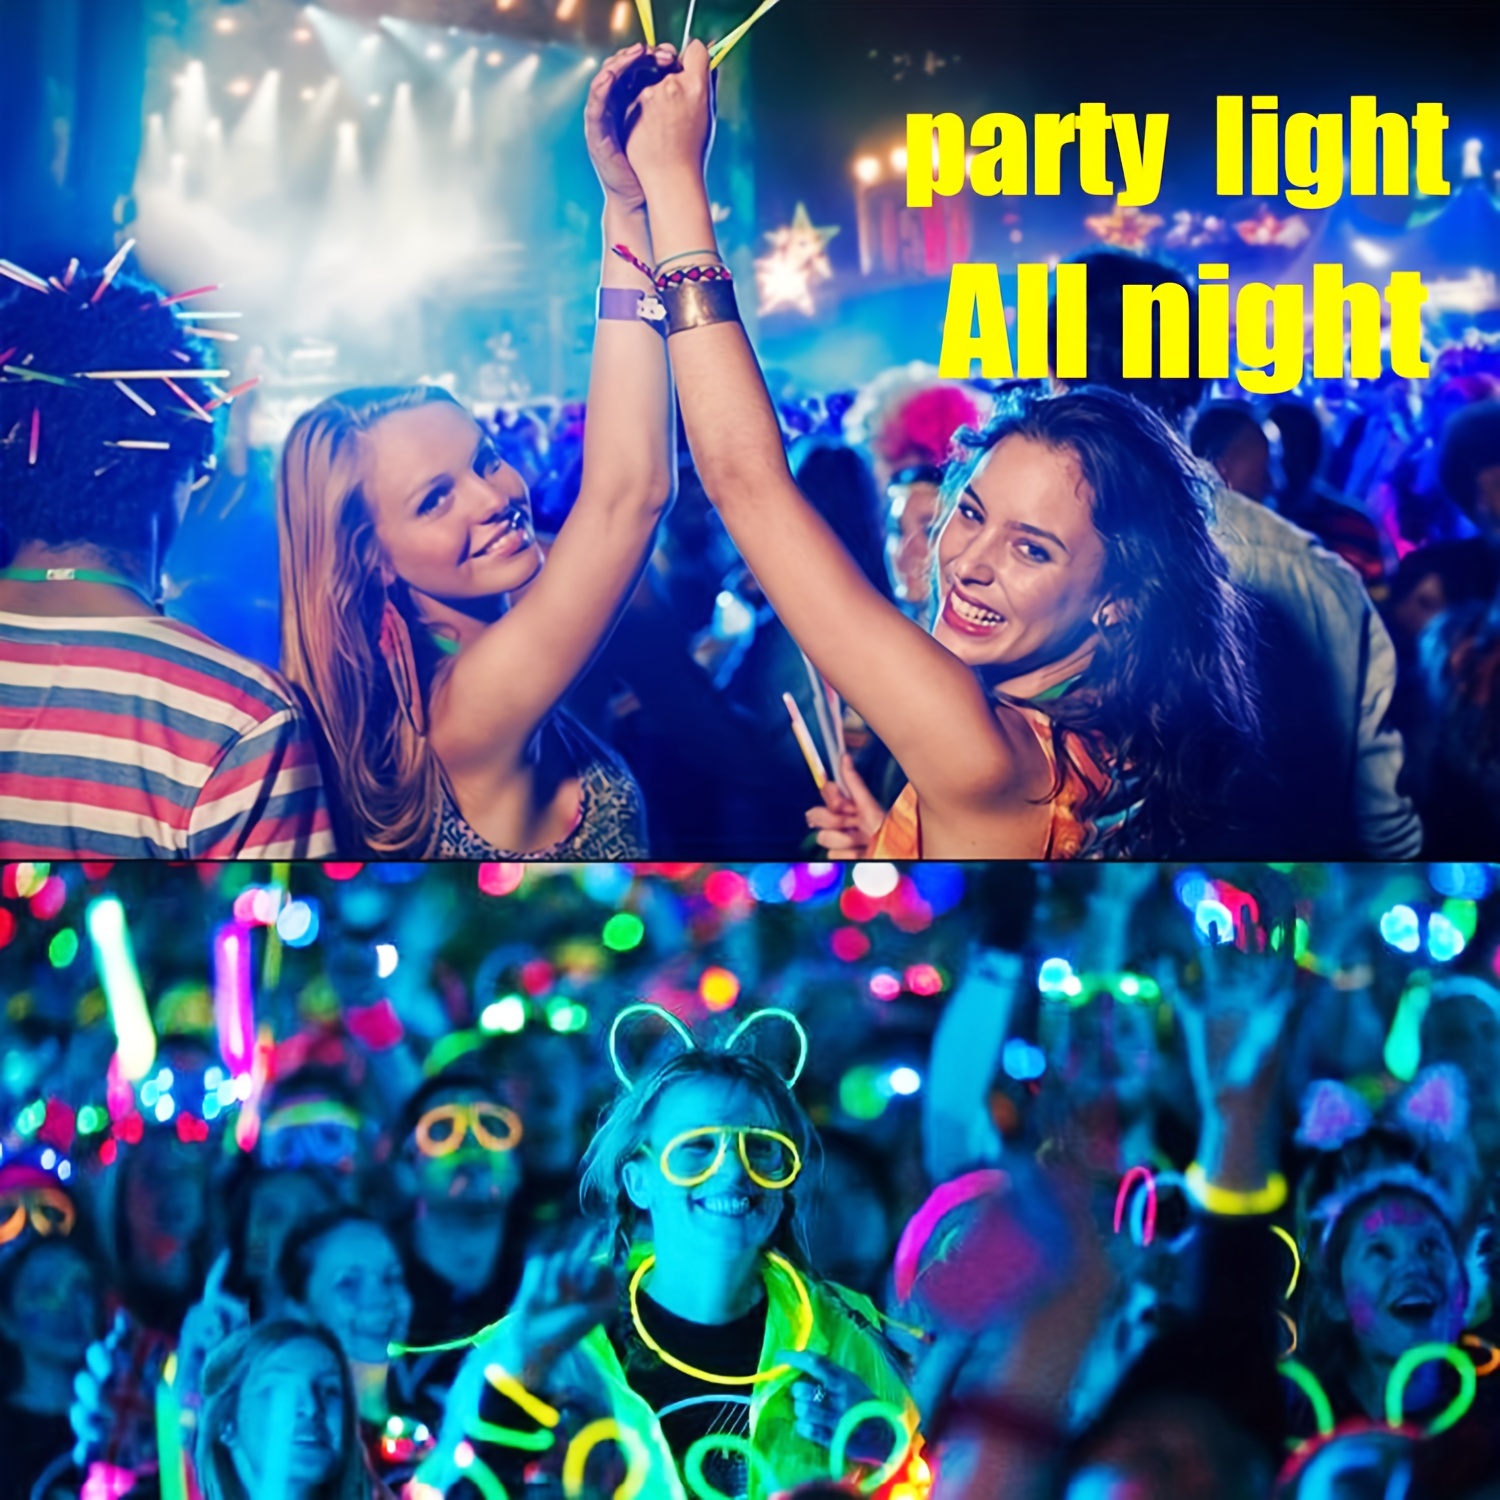 Glow Party Accessories Pack, Glow Party